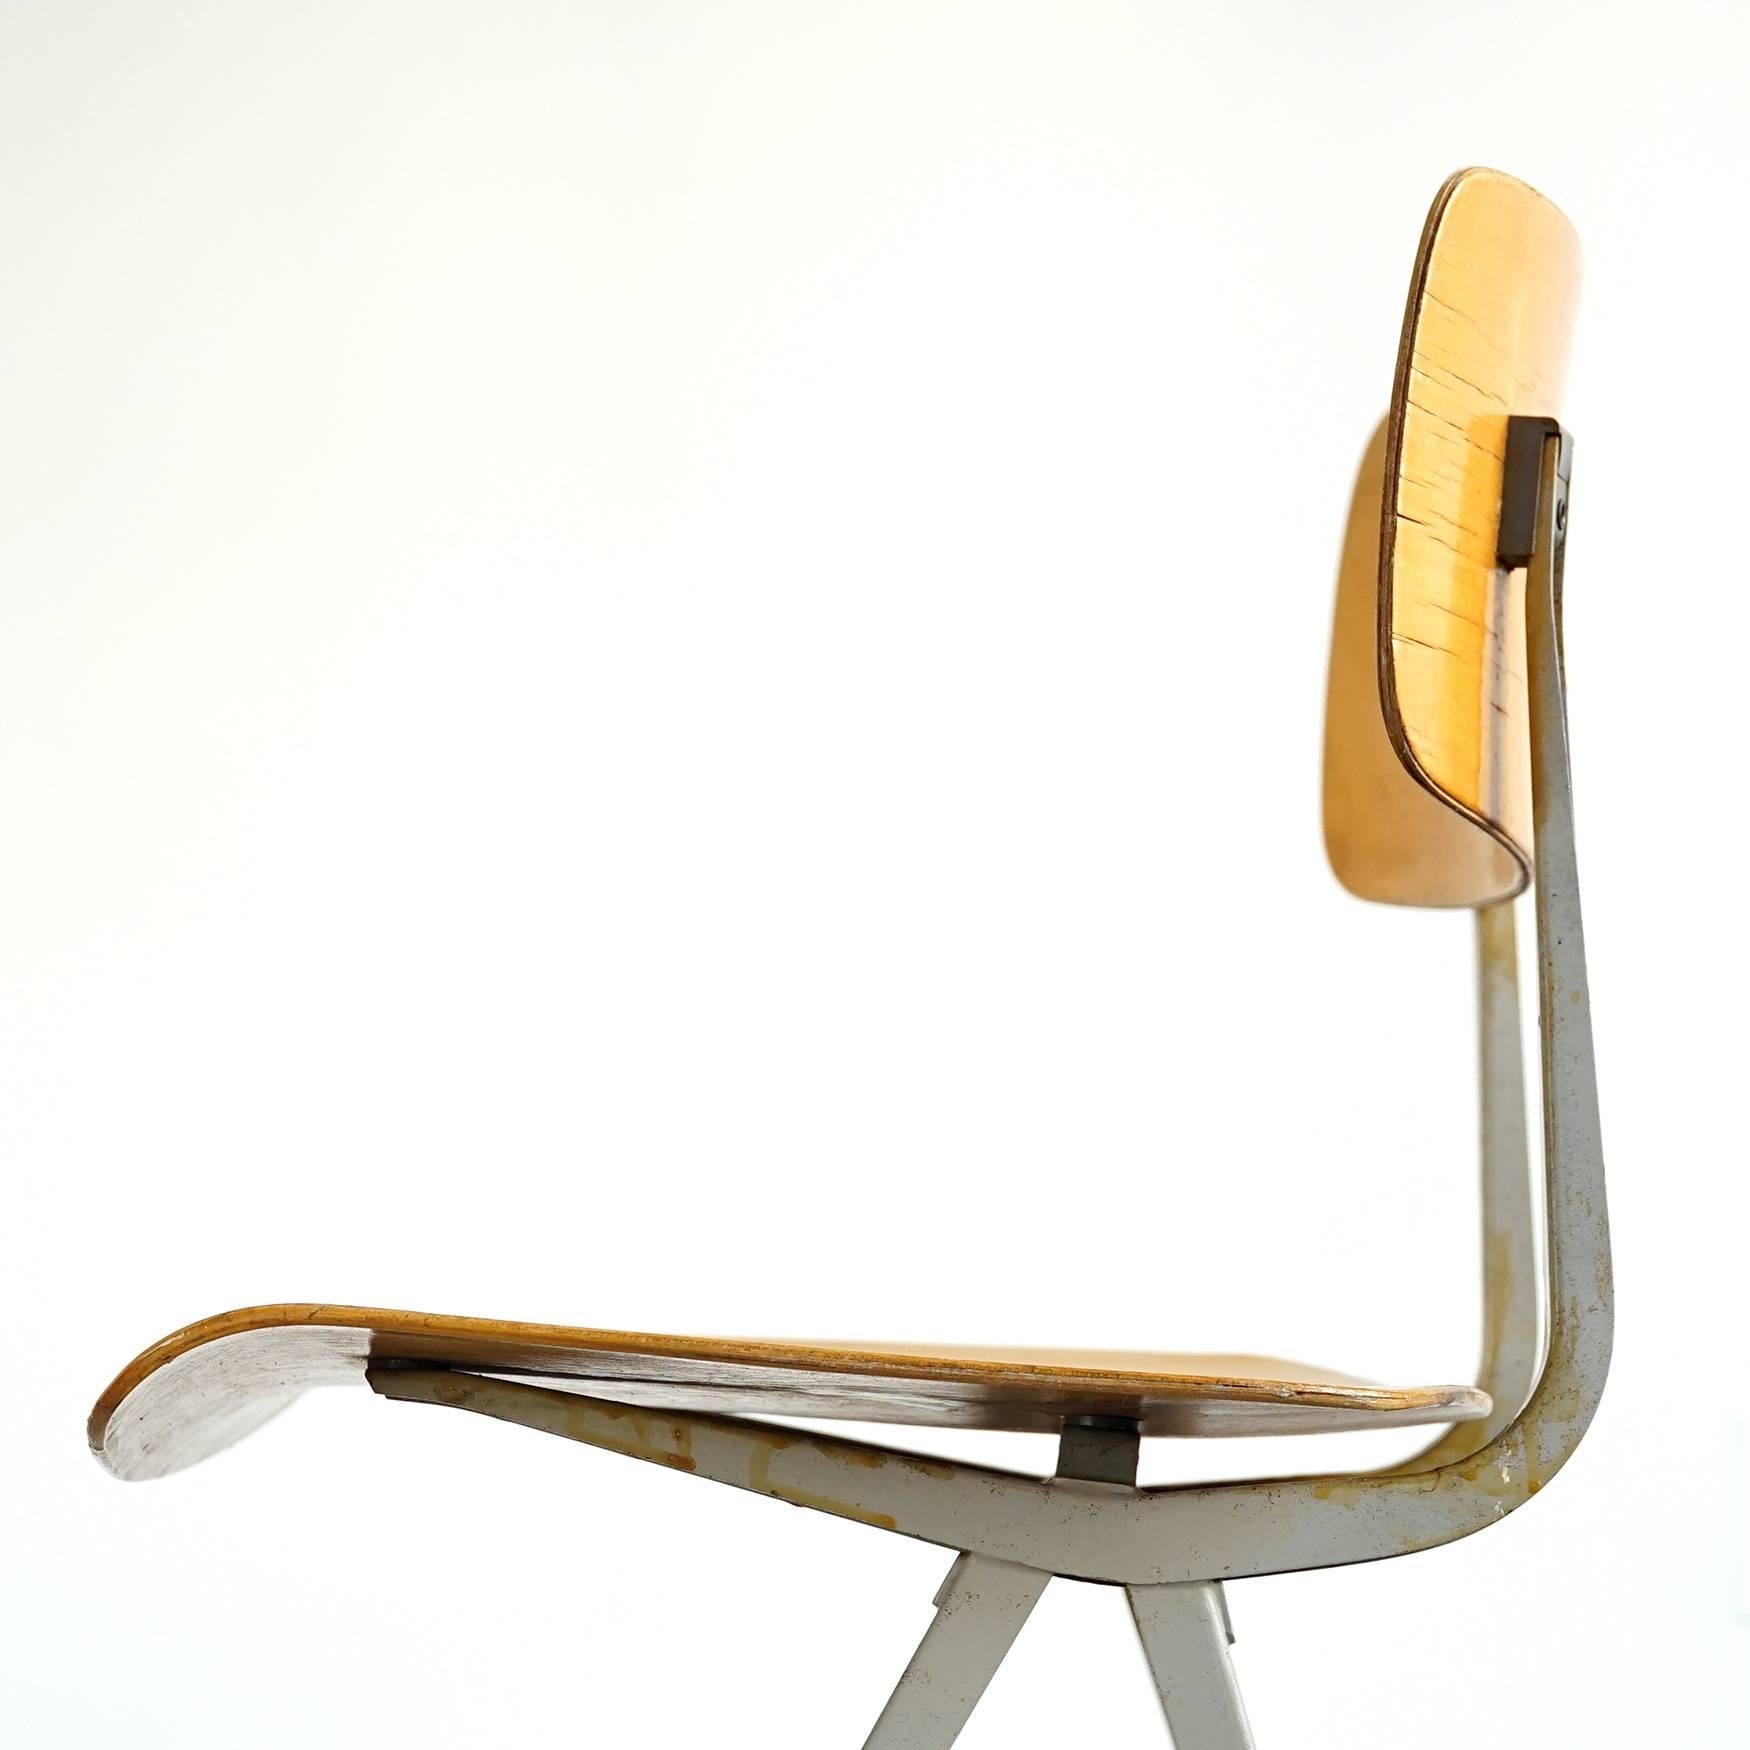 Bent plywood seat and back. Steel frame. Manufactured in Holland by Ahrend.